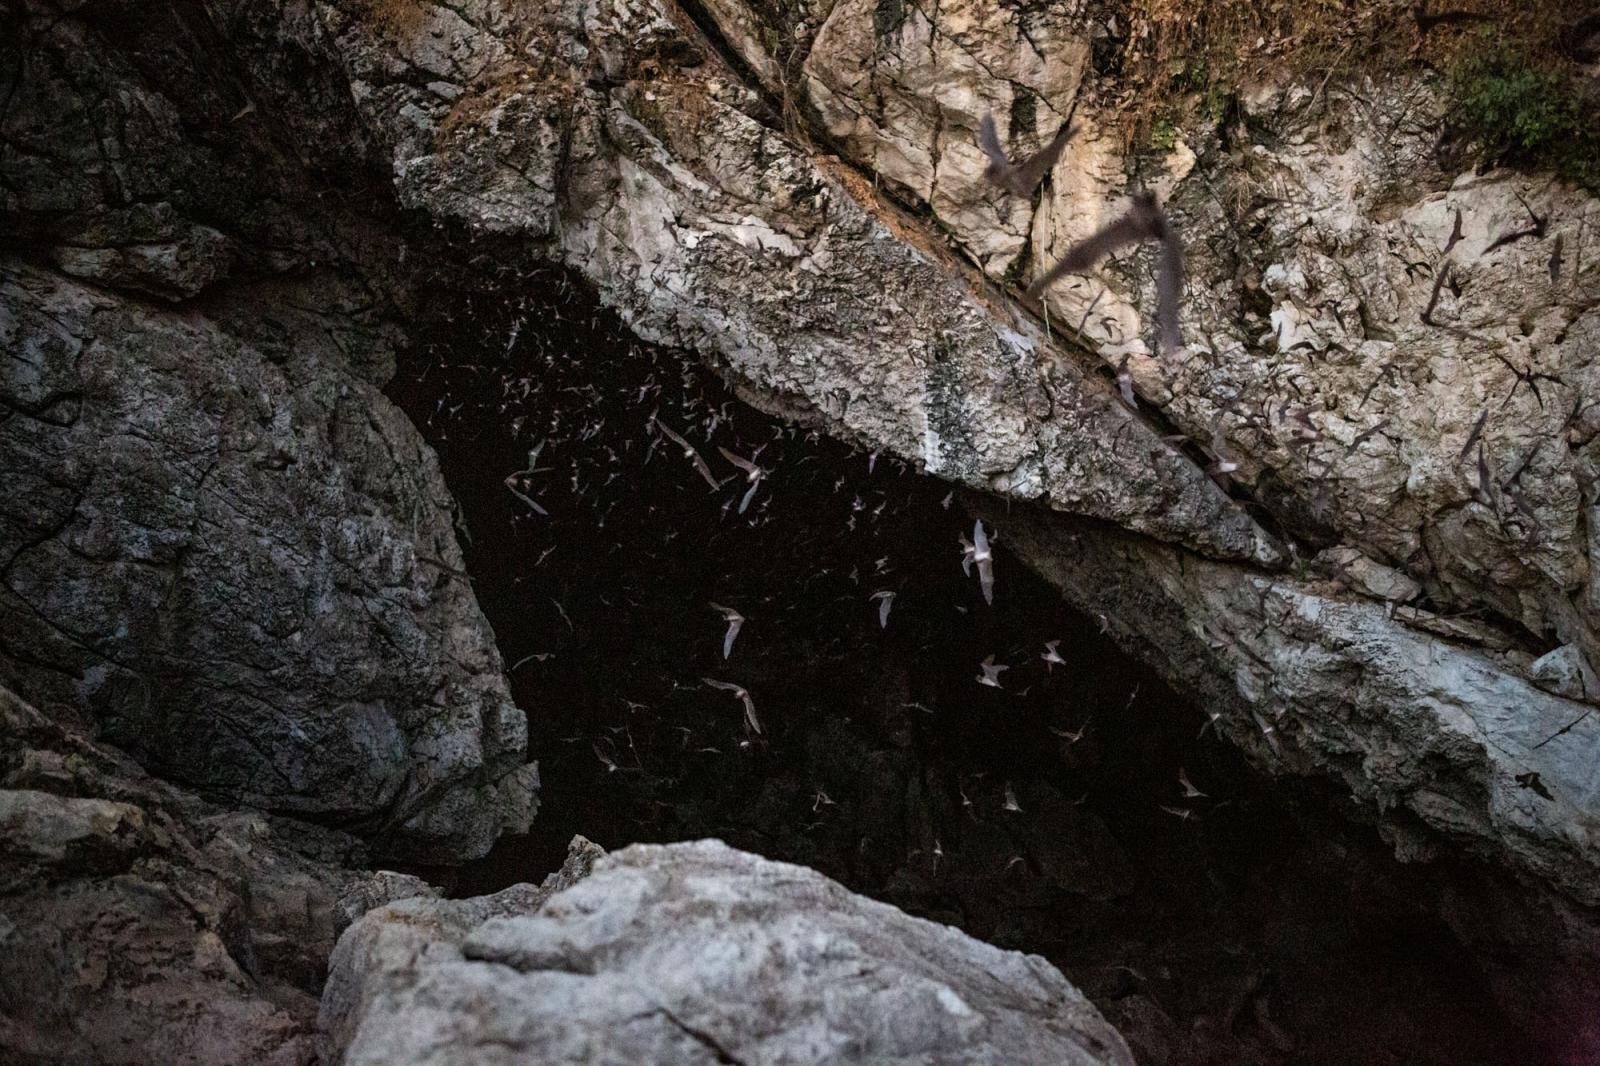 Bats stream out of a crevice to...aburi, Thailand, December 2020.